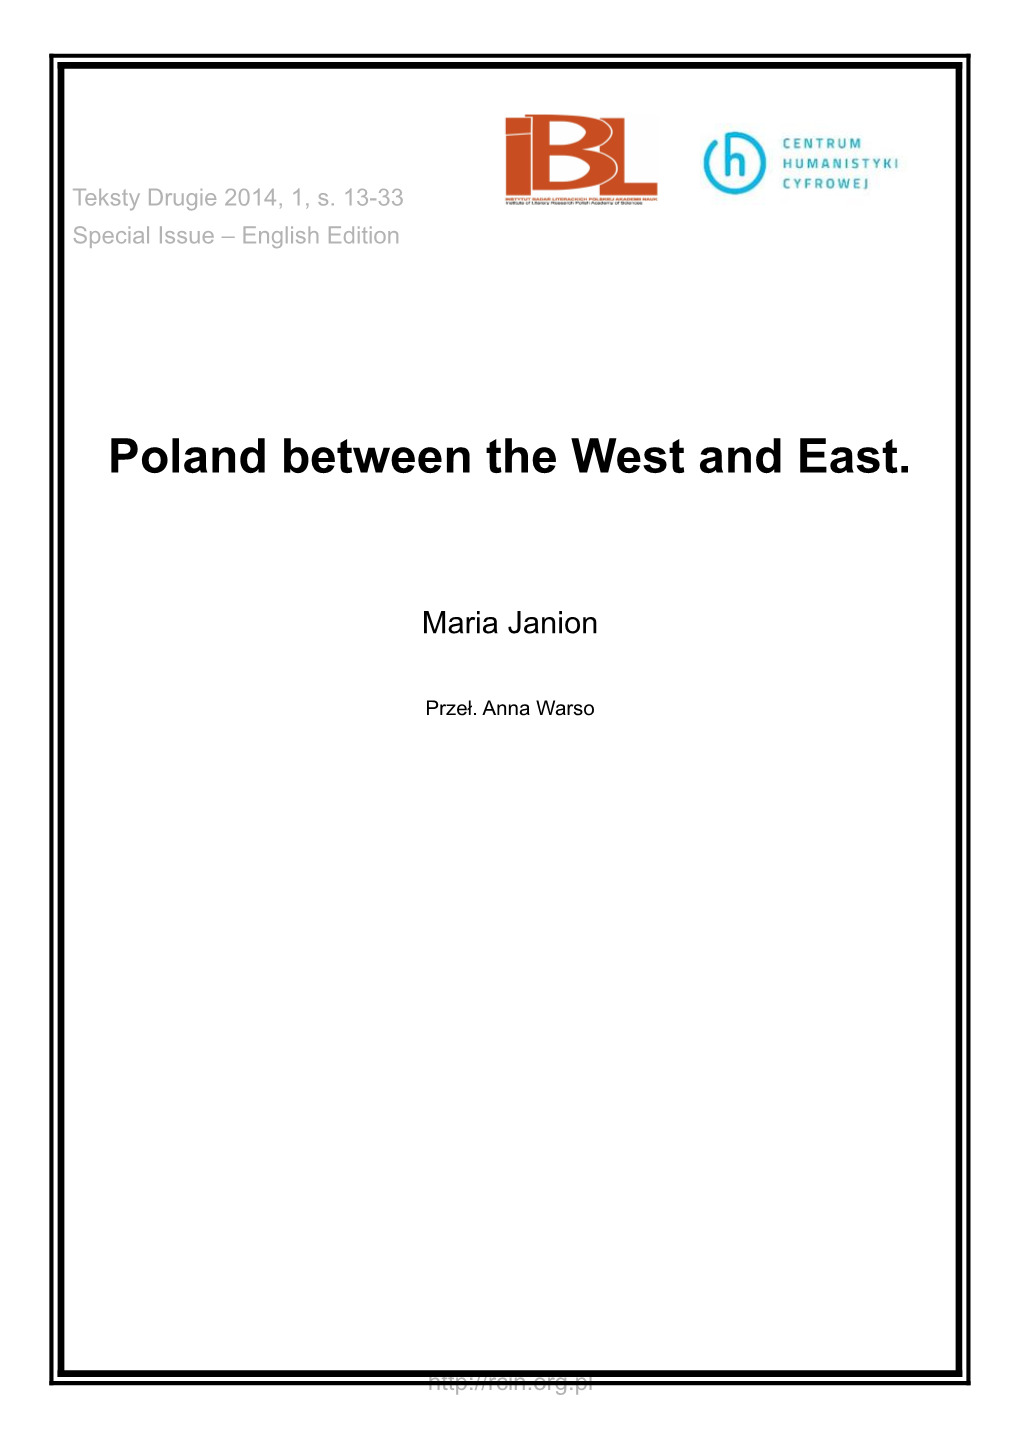 Poland Between the West and East